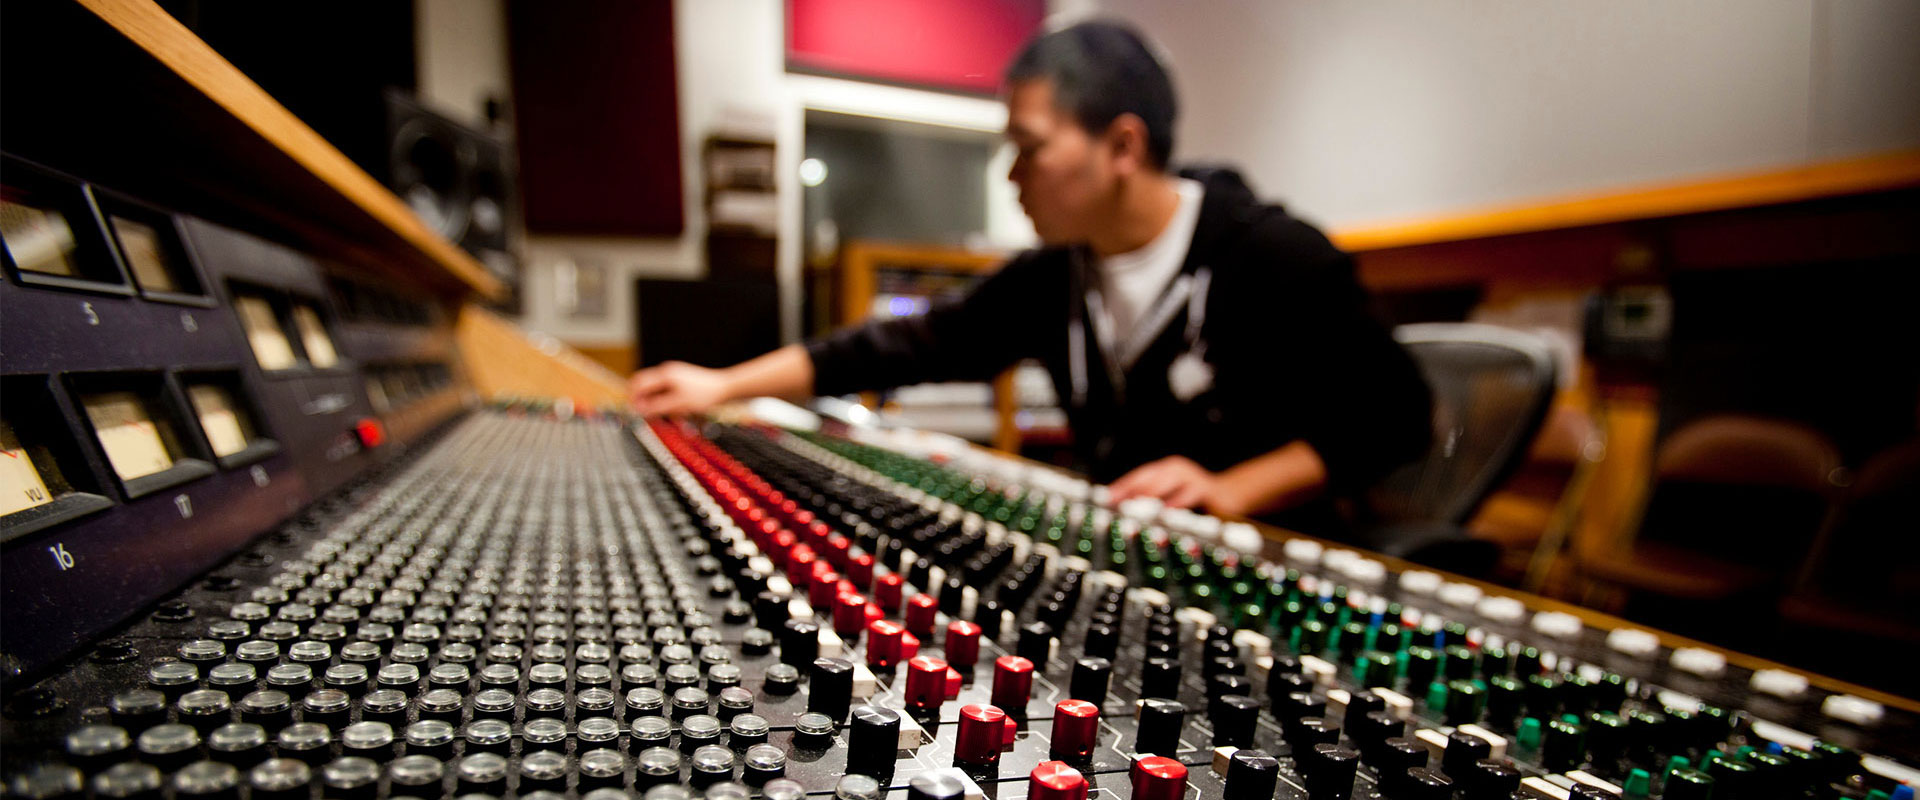 A student using a sound board with many knobs and dials